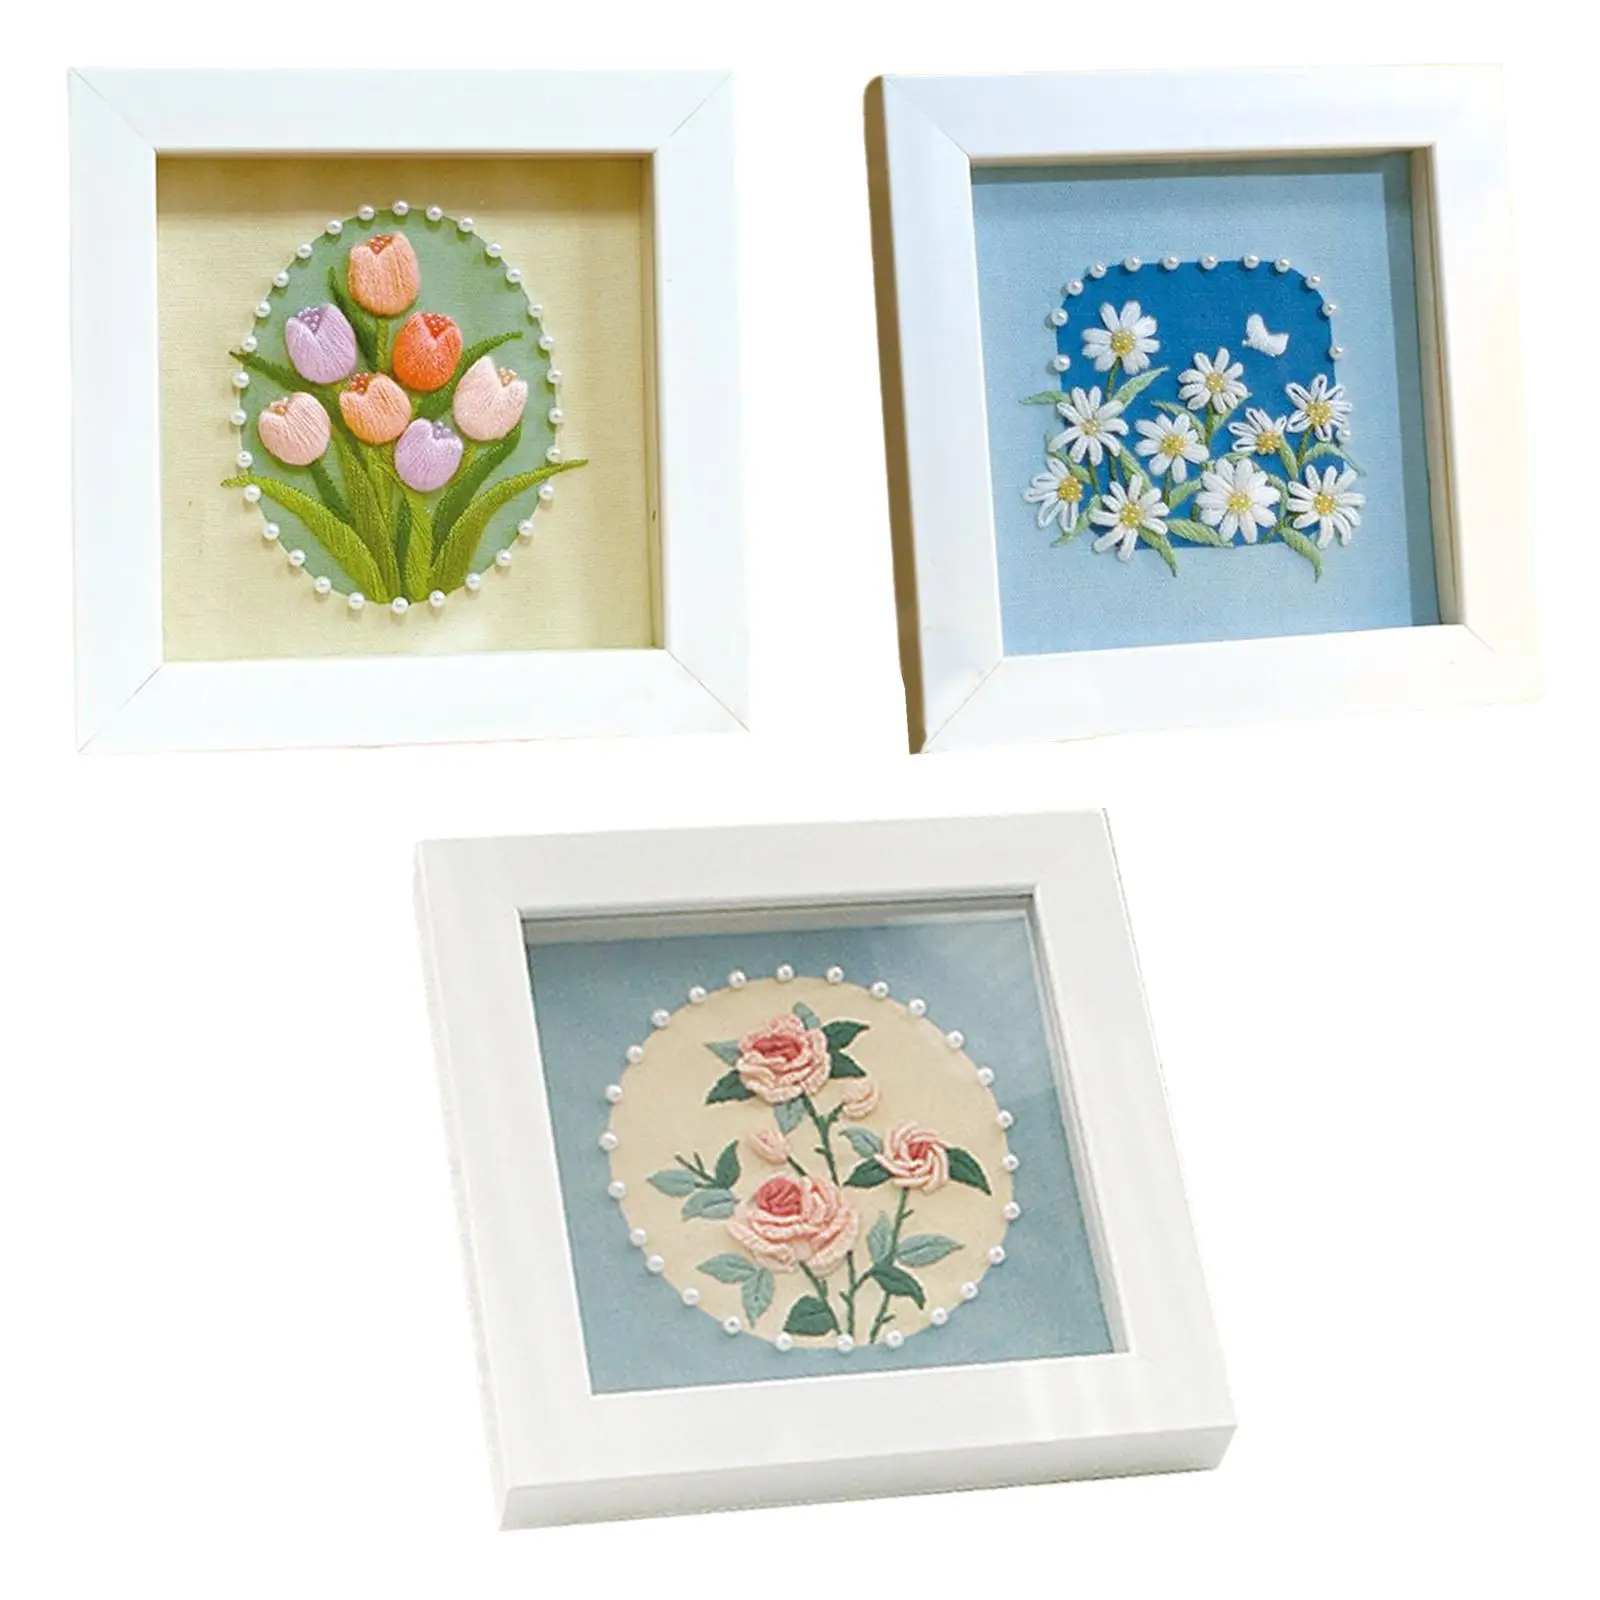 Embroidery Kits Full Embroidery Starter Kits DIY Home Decoration